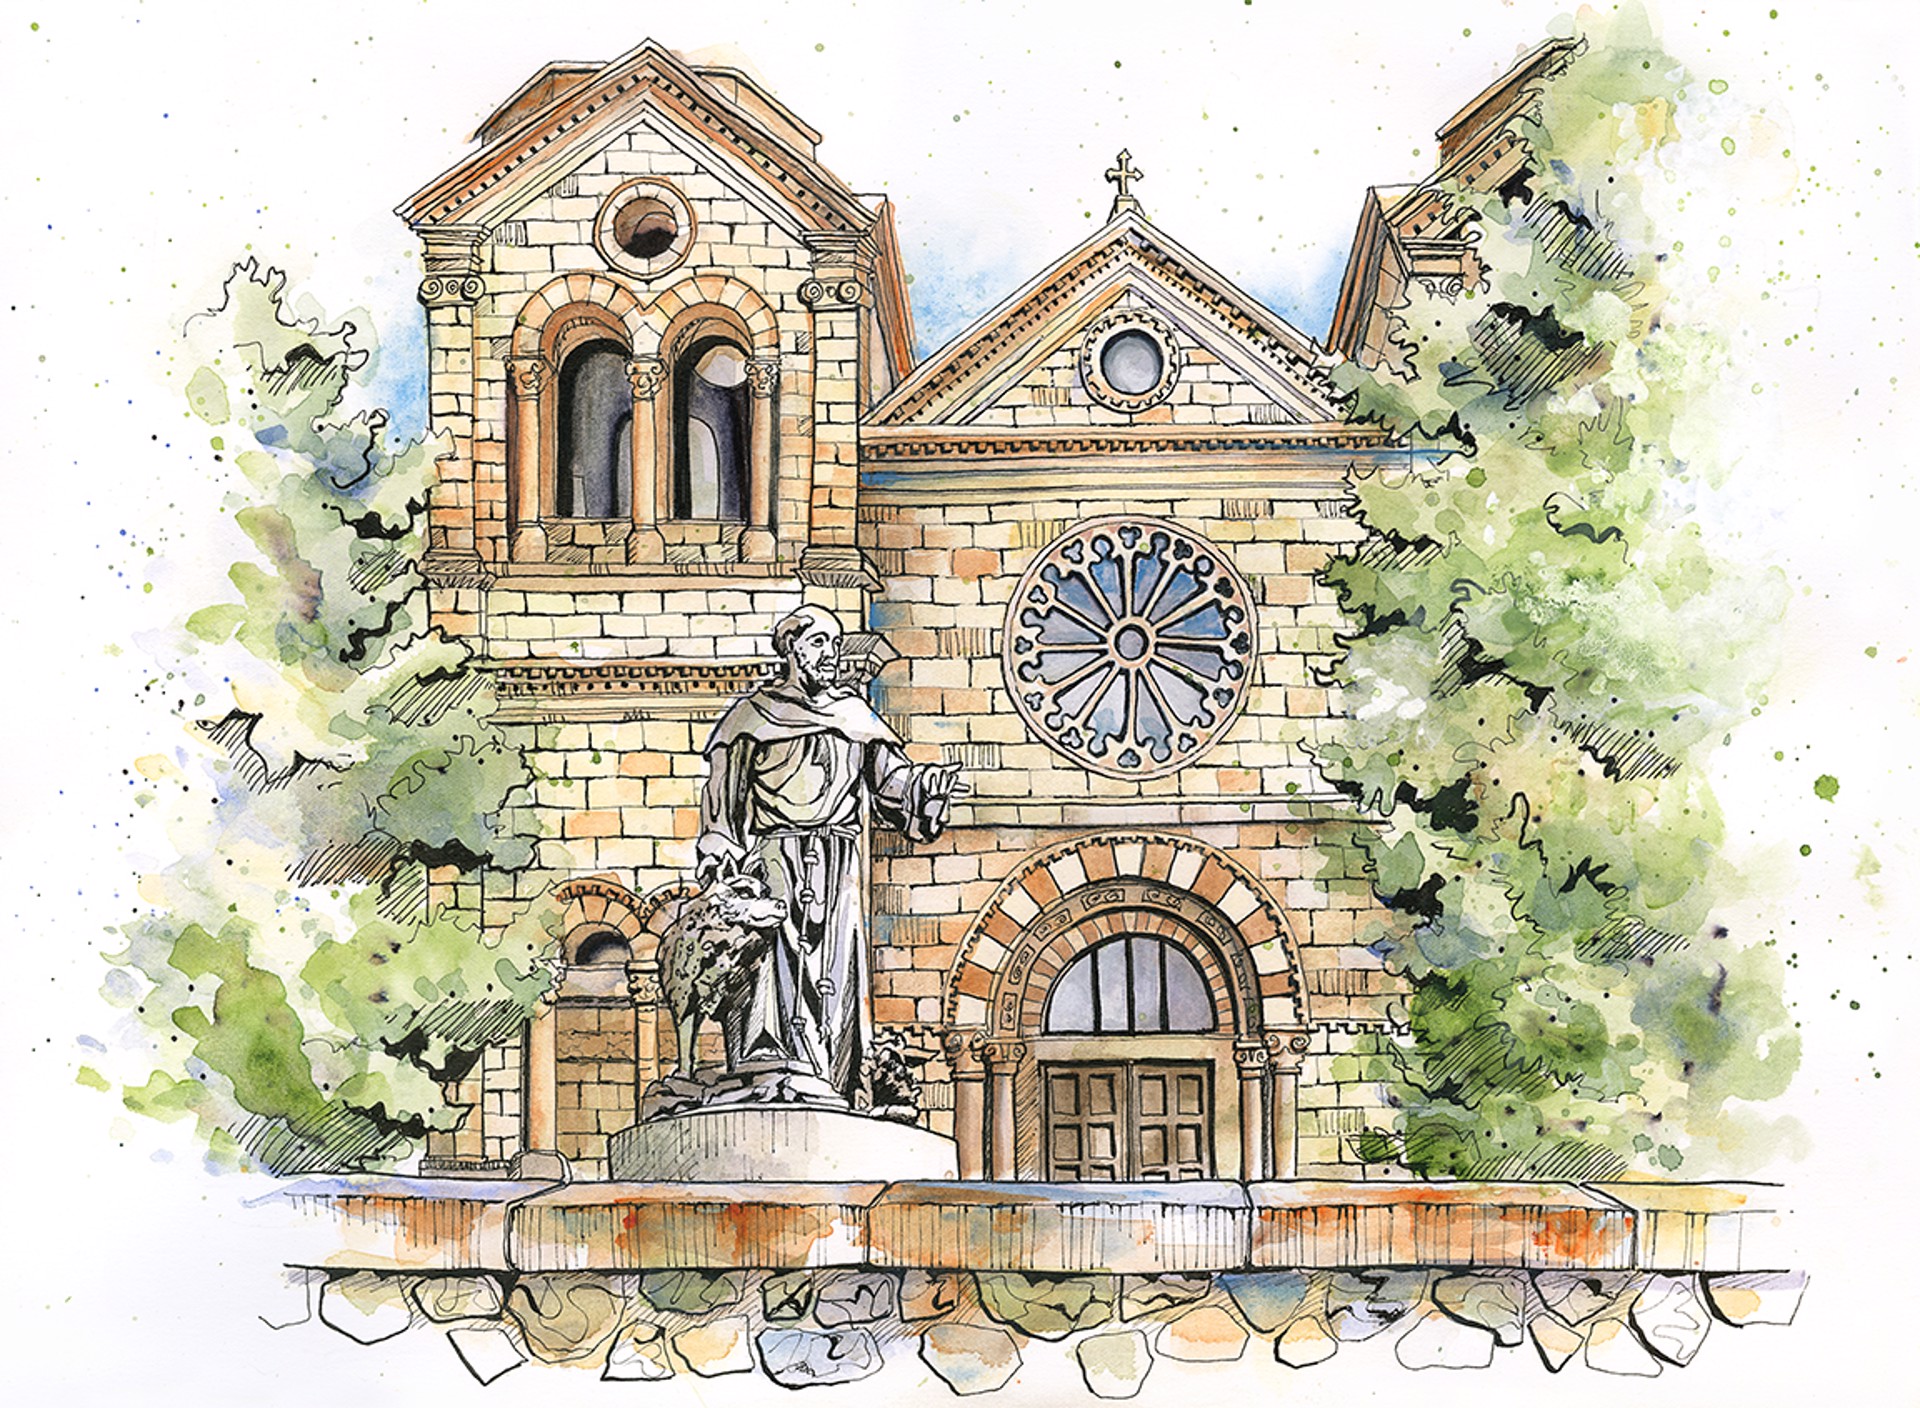 The St. Francis Cathedral by Marilee Nielsen